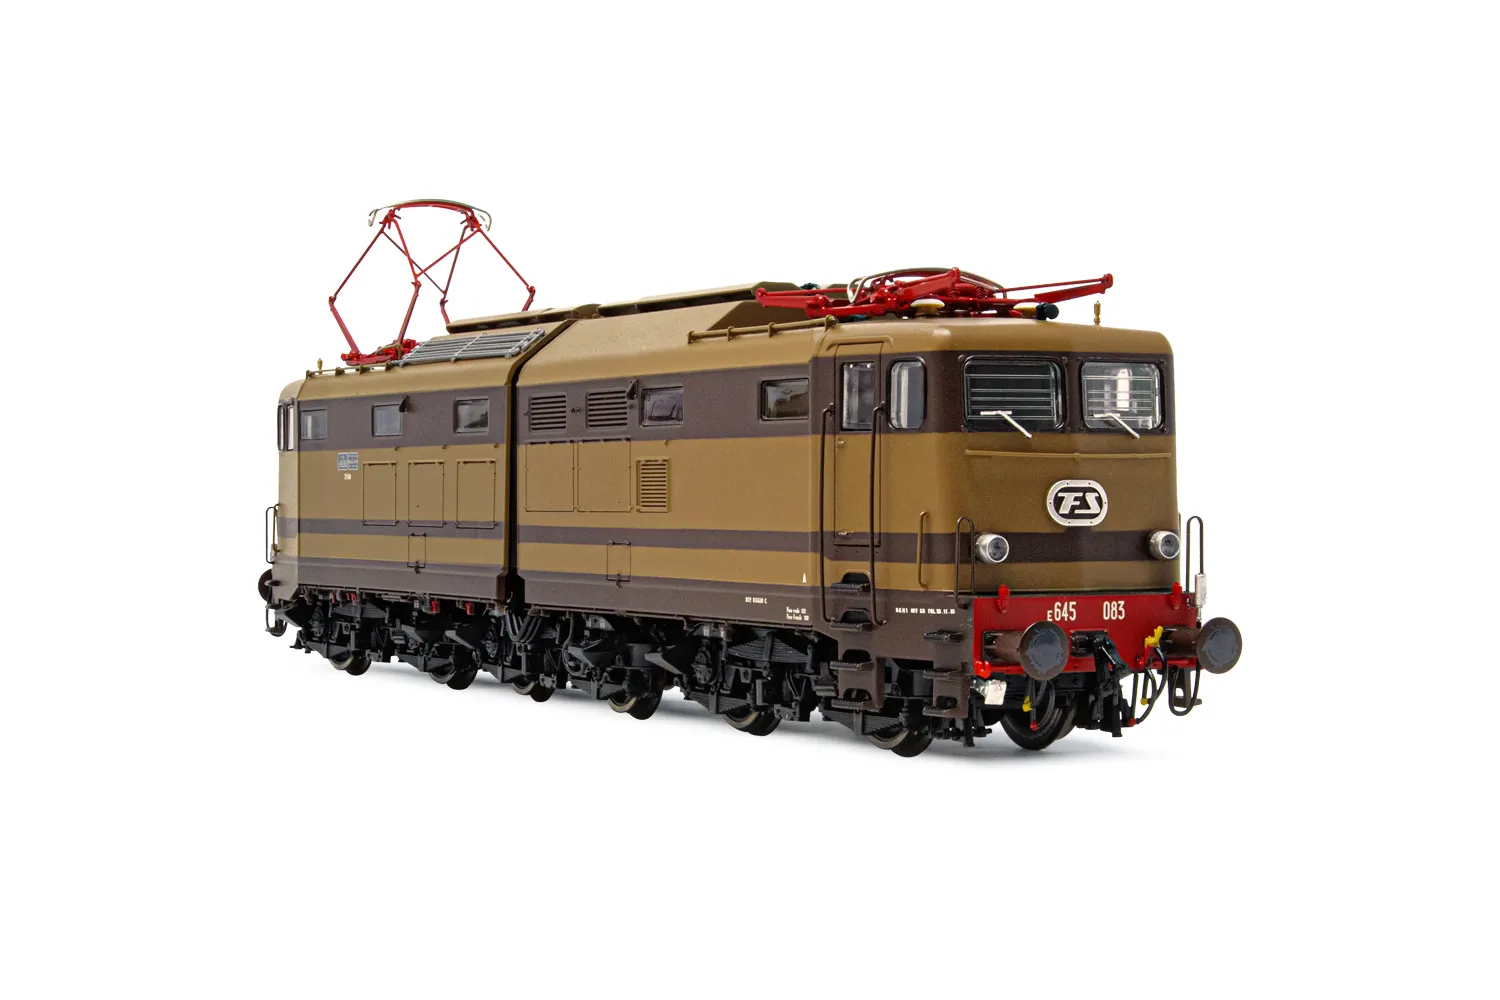 FS, electric locomotive E.645, 2nd series, original front windows, castano/isabella livery, period IV-V, with DCC-sounddecoder